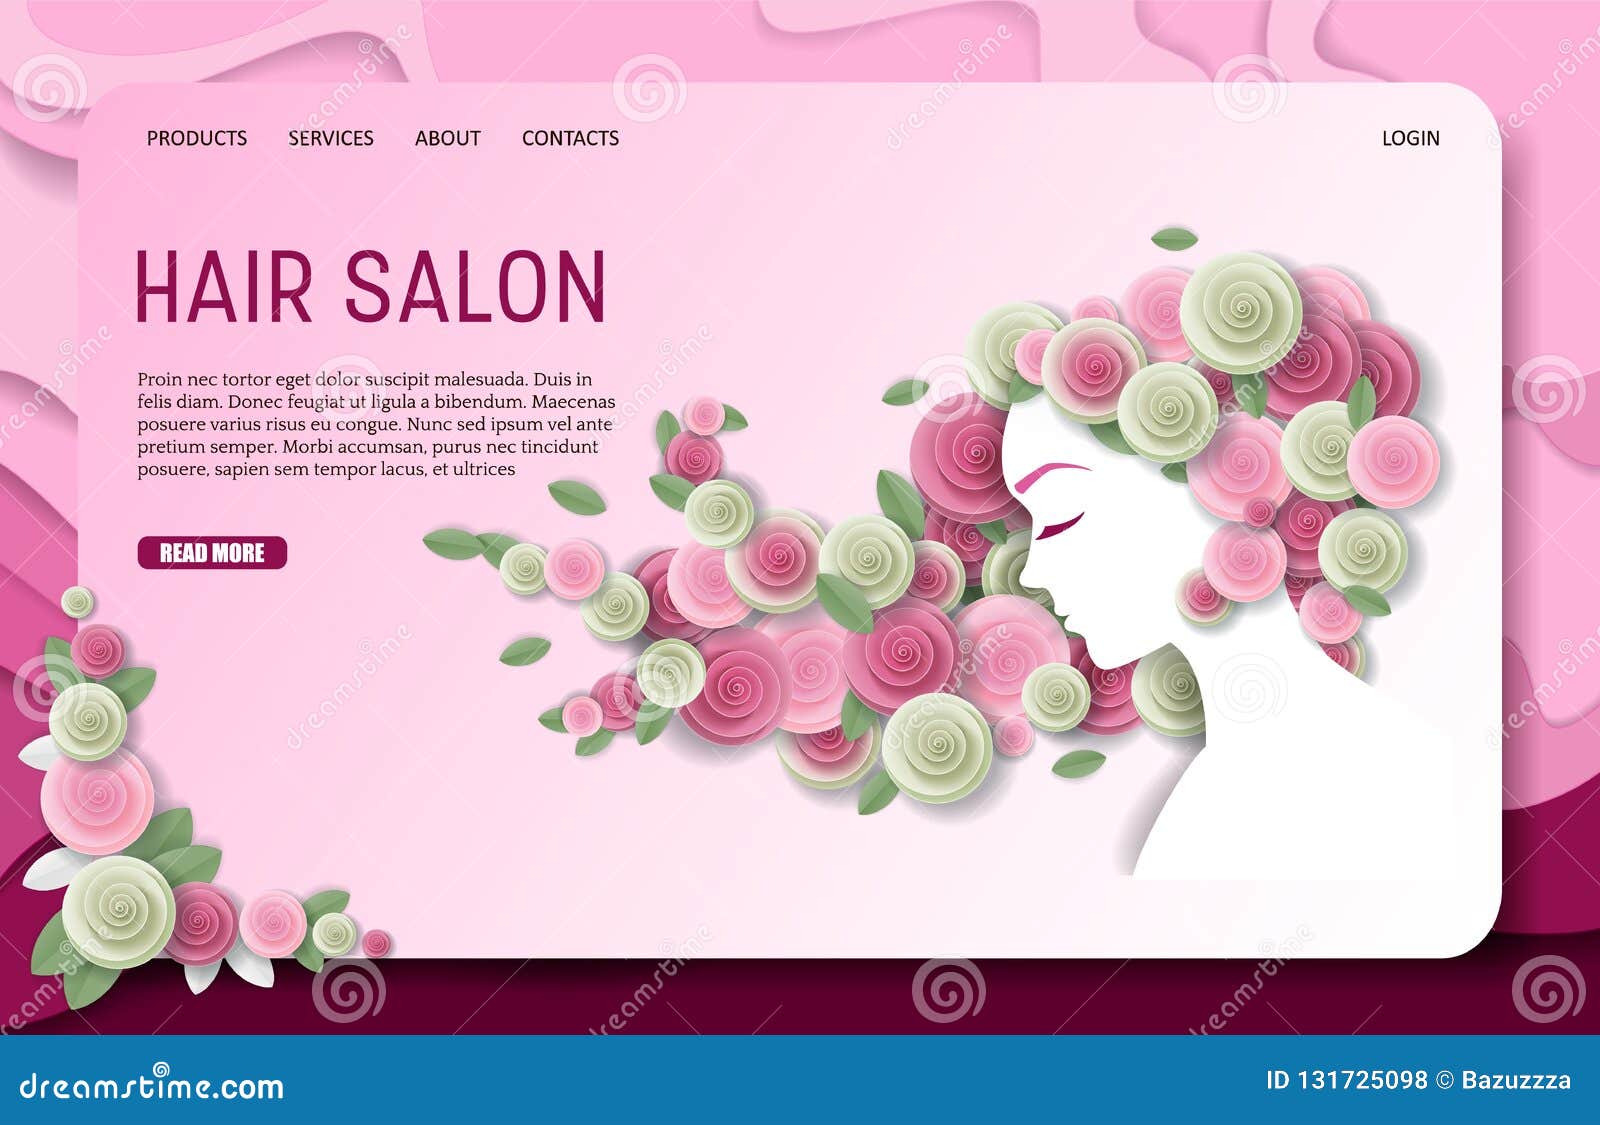 Vector Paper Cut Hair Salon Landing Page Website Template Stock Vector -  Illustration of homepage, haircut: 131725098